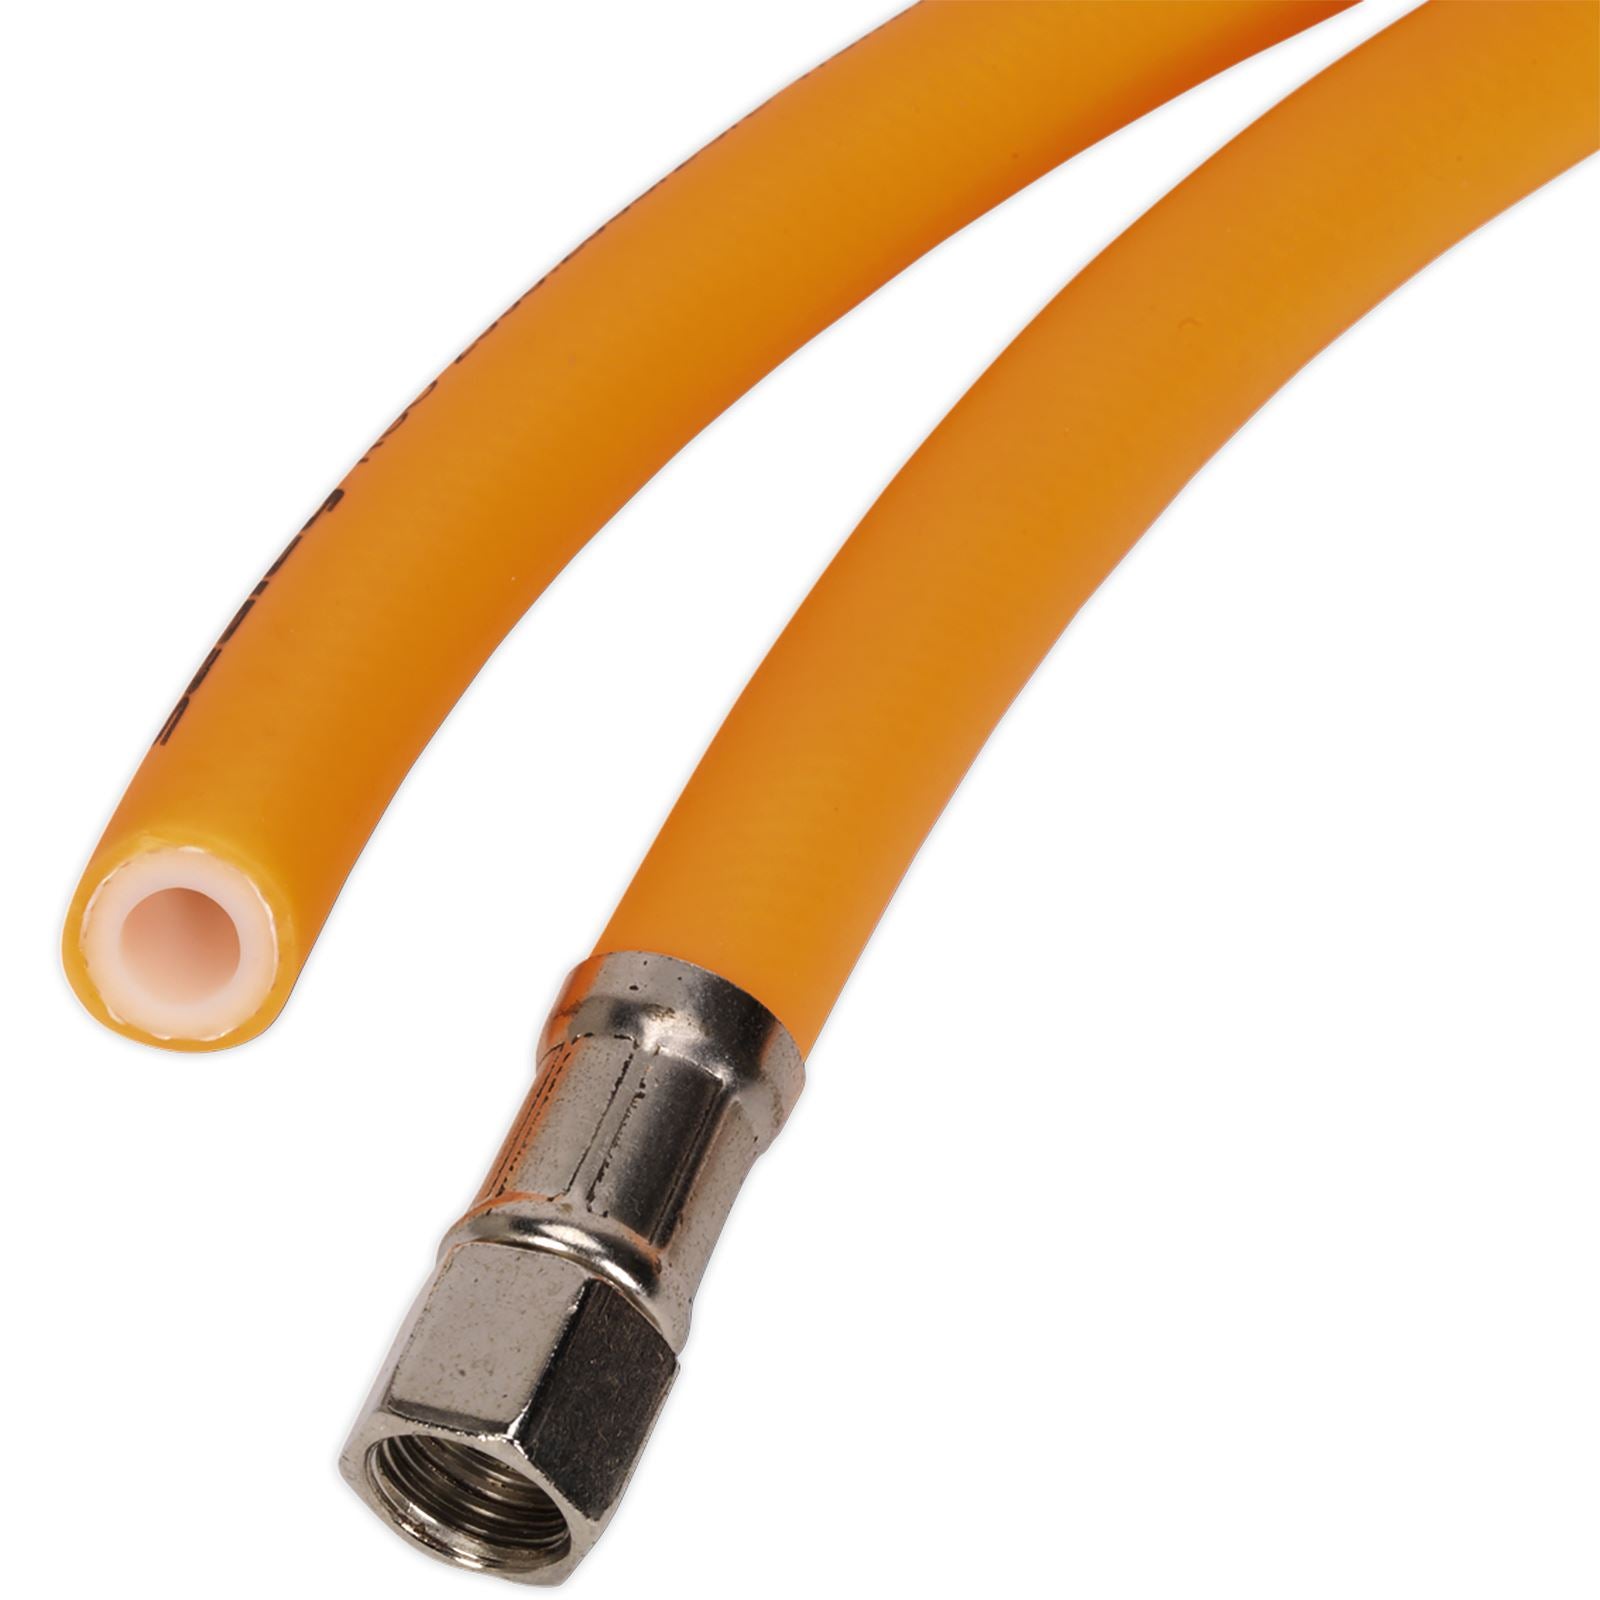 Sealey 20m x Ø10mm Hybrid High Visibility Air Hose with 1/4" BSP Unions